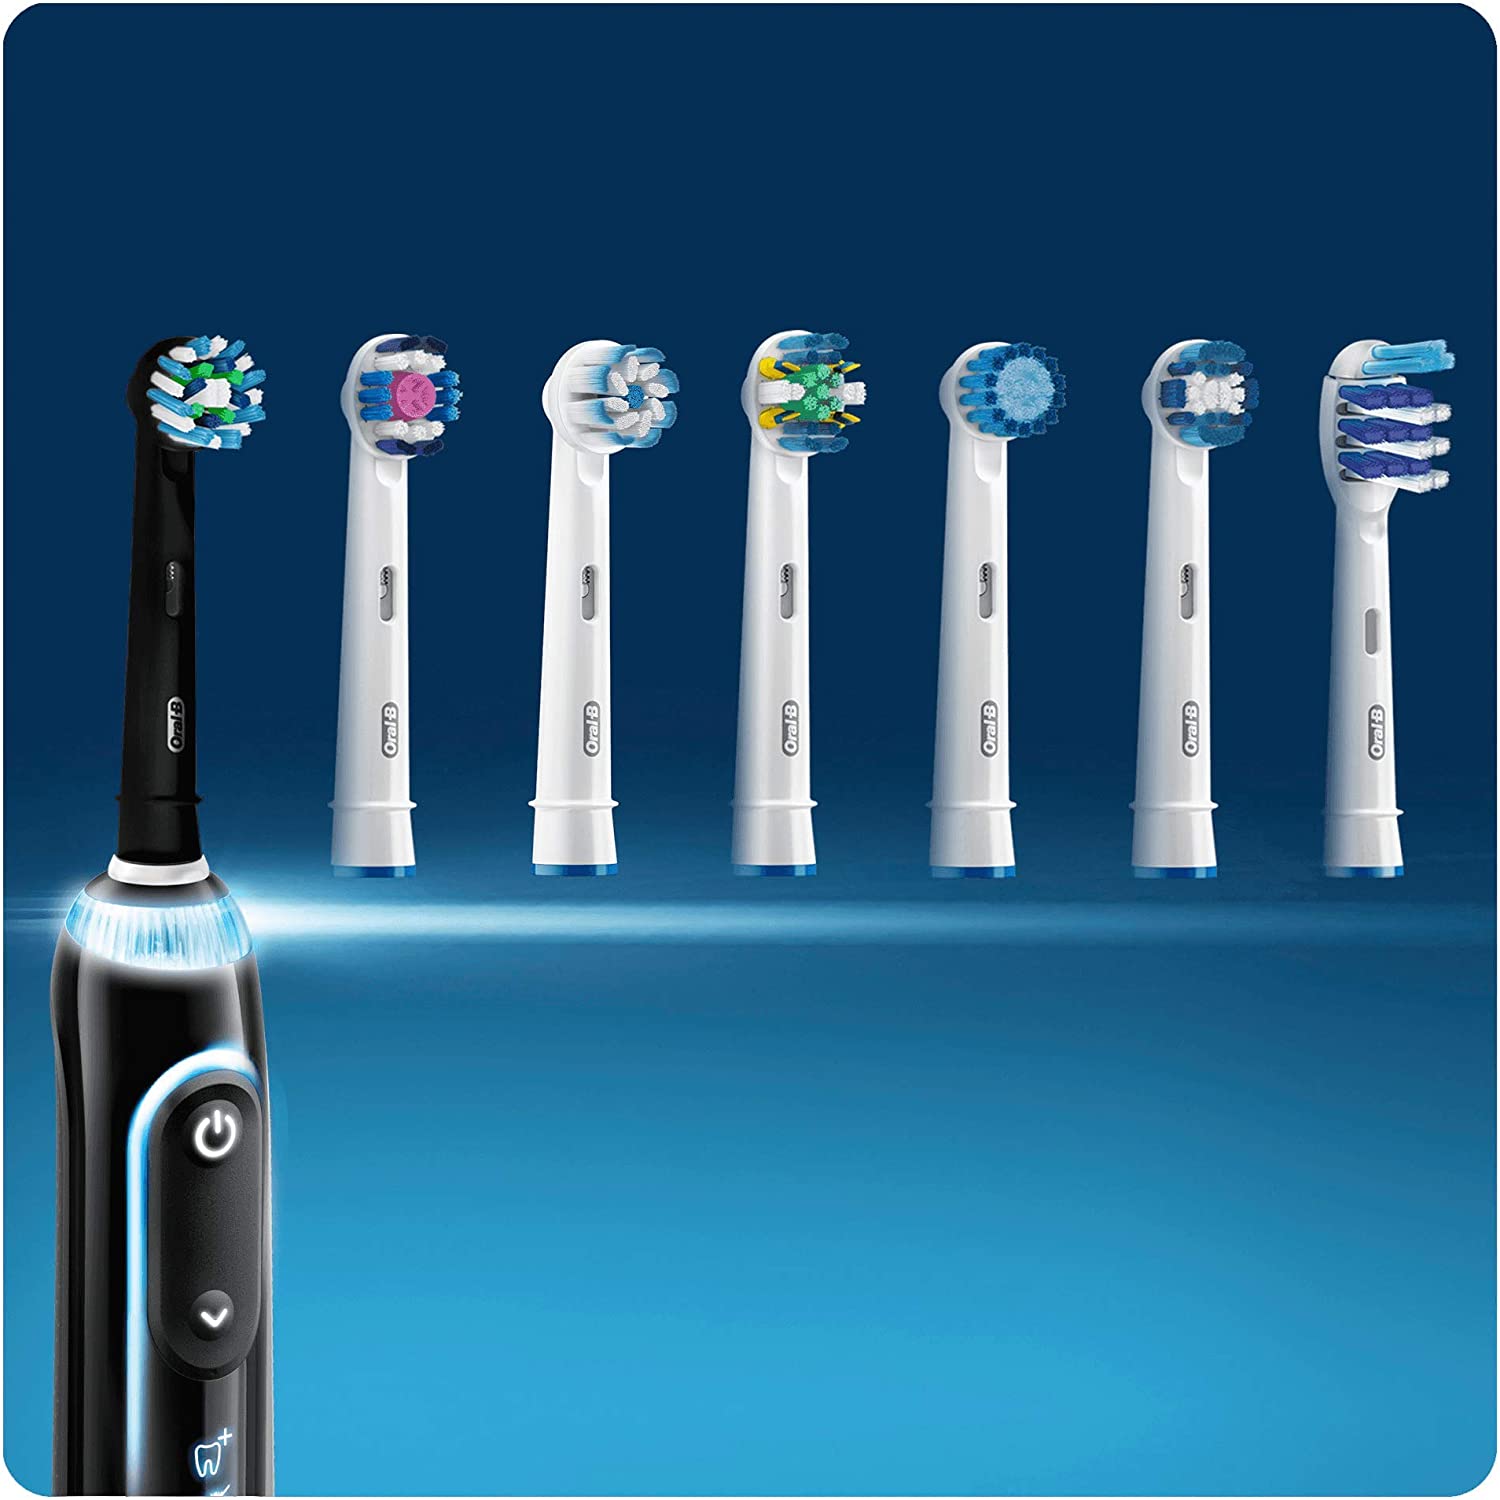 Oral-B CrossAction 2pk Replacement Toothbrush Heads - Black Edition - Healthxpress.ie